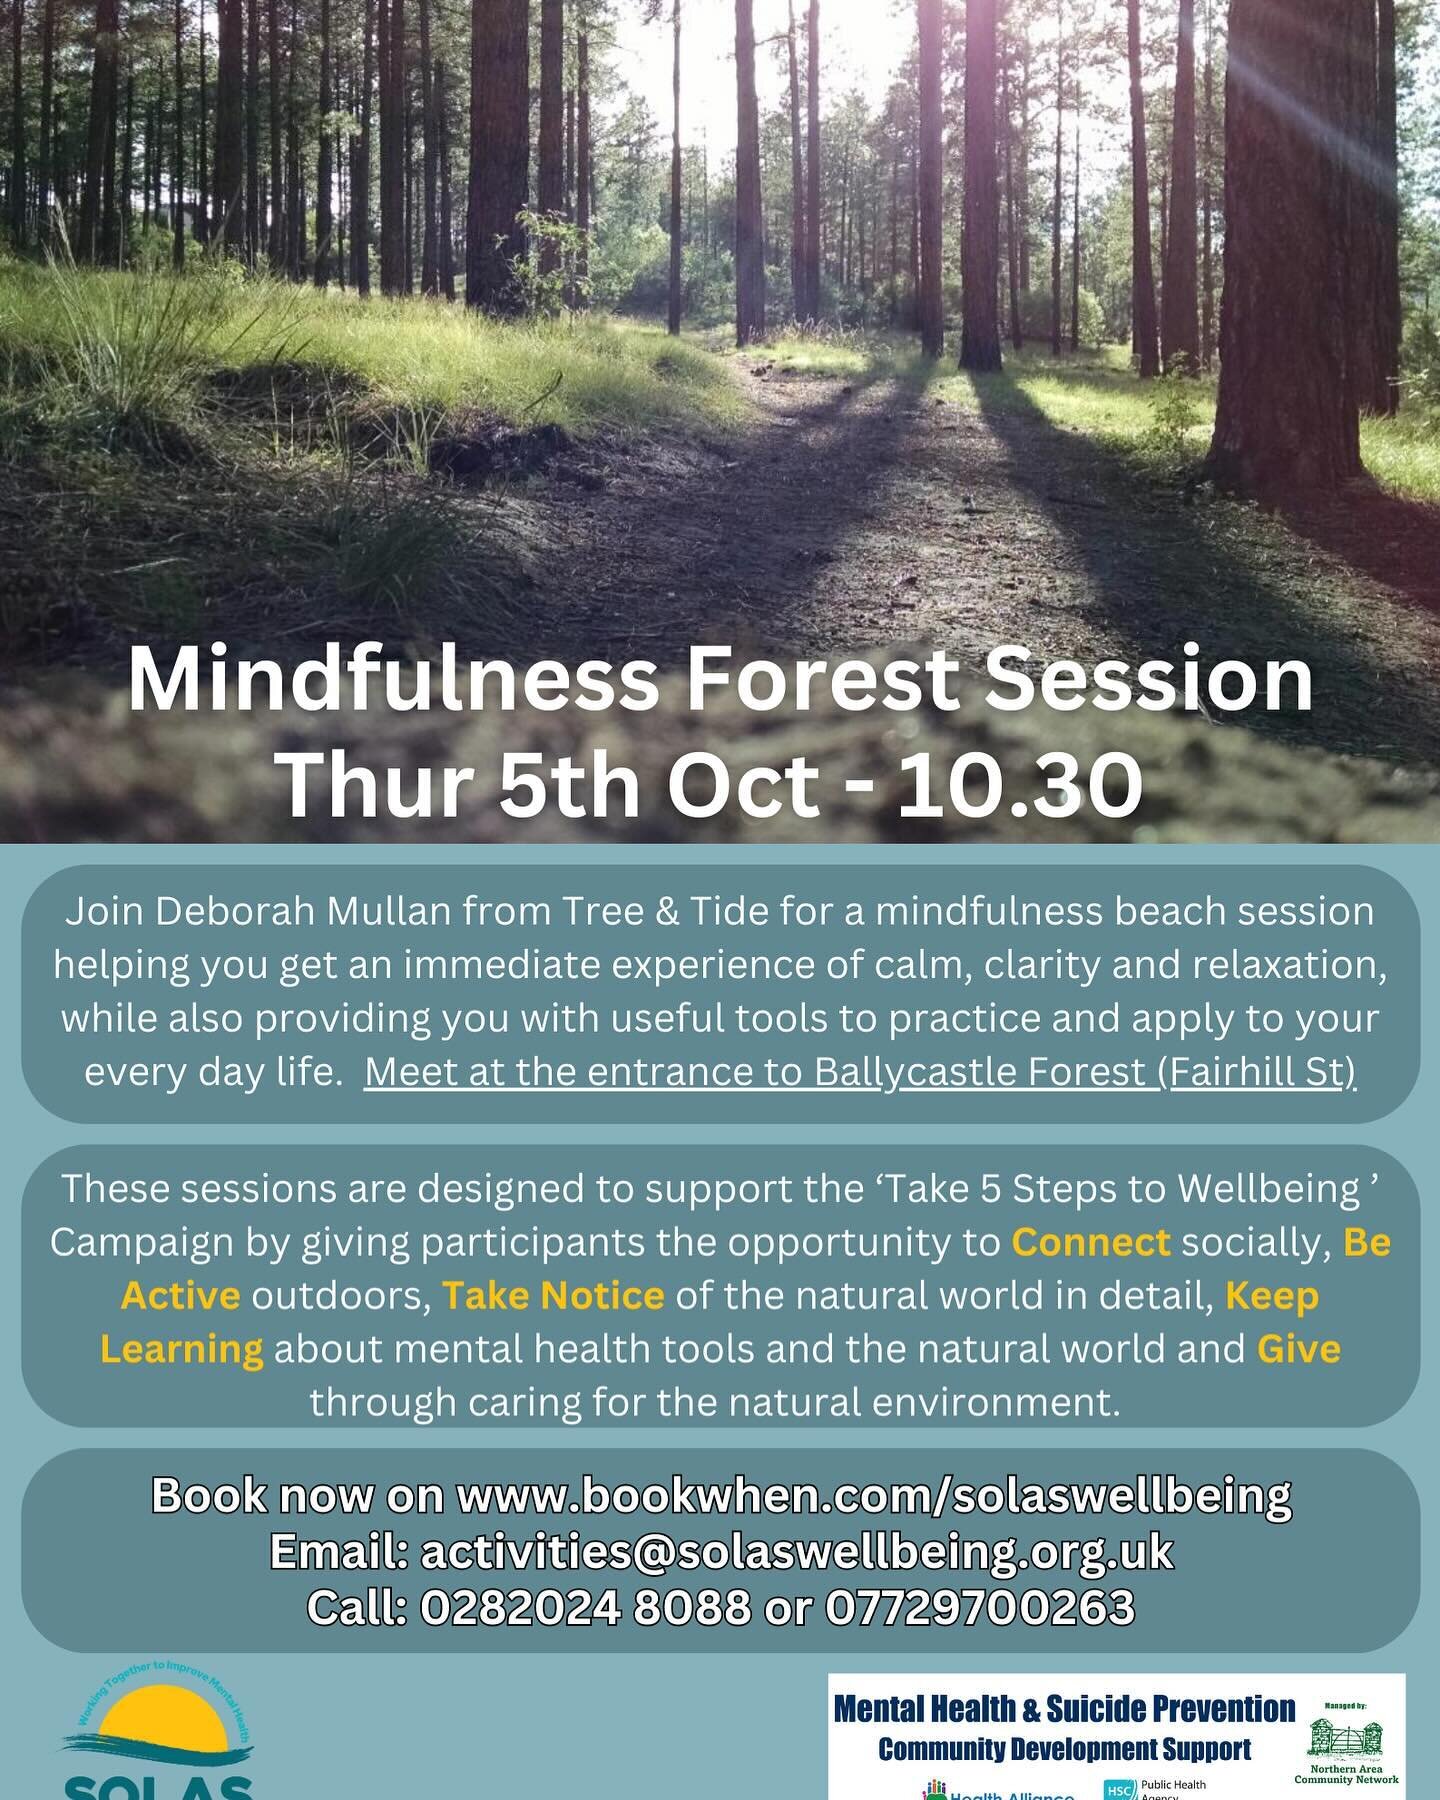 If you are around the North Coast and need to catch your breath in the whirl of Autumn busyness then this is for you!
Join me in Ballycastle Forest for an immersive and restful experience of nature this Thursday- booking details above. 🌲🌳🍁
#forest